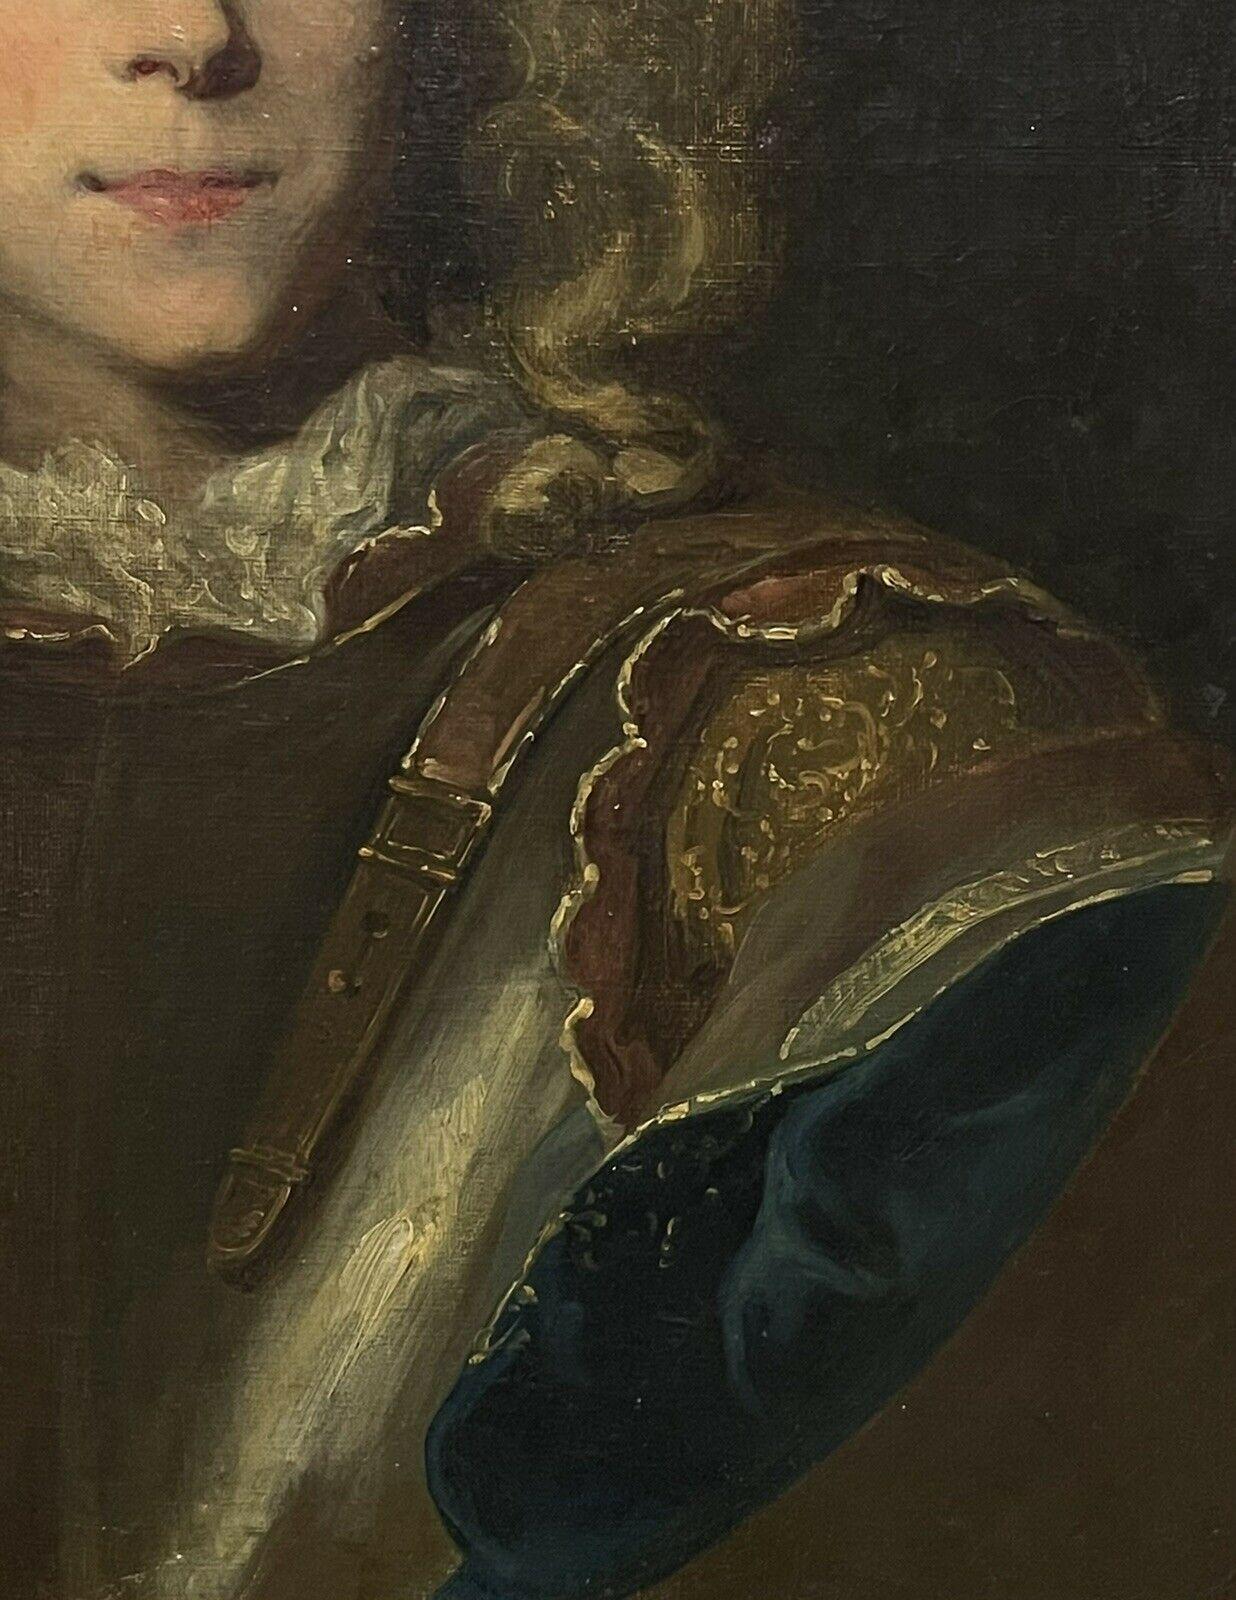 Artist/ School: French School, 18th/ 19th century

Title: Portrait of a Young Nobleman

Medium: oil painting on canvas, unframed.

canvas: 21.75 x 18.25 inches

Provenance: private collection, Bordeaux, France

Condition: The painting is in overall